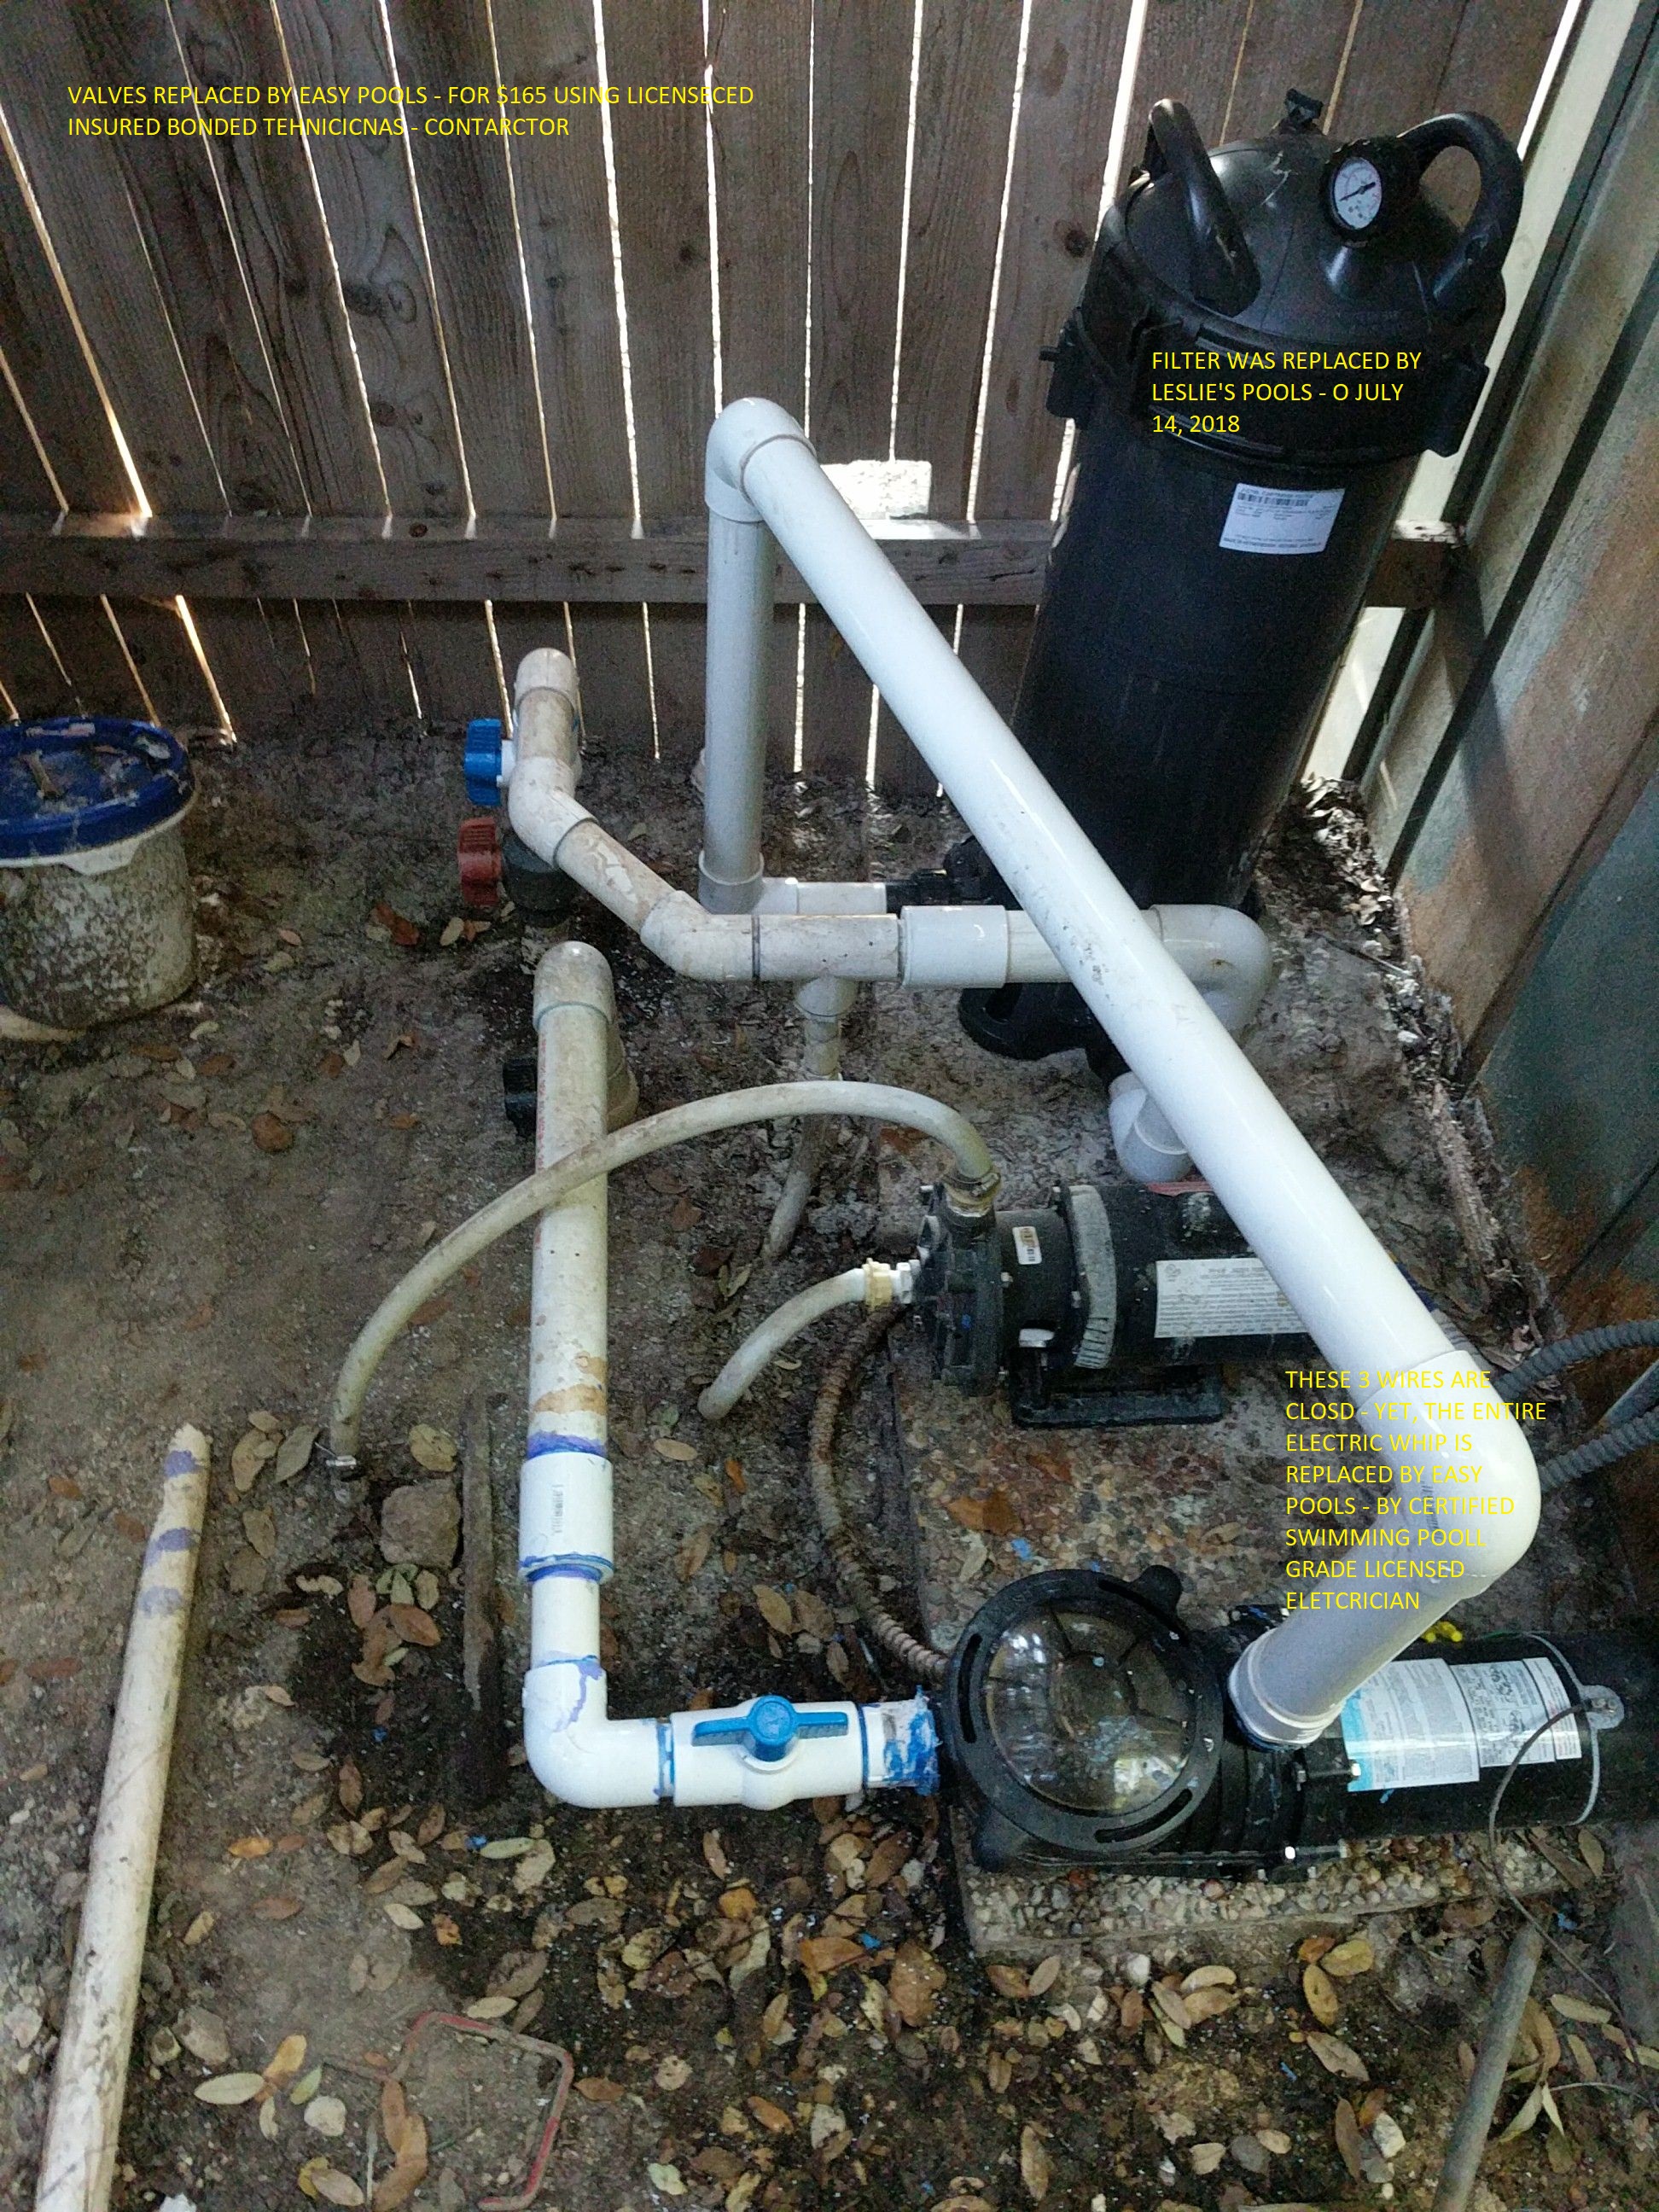 VALVES REPLACED BY EASY POOLS - FOR $165 USING LICENSECED INSURED BONDED TEHNICICNAS - CONTARCTOR